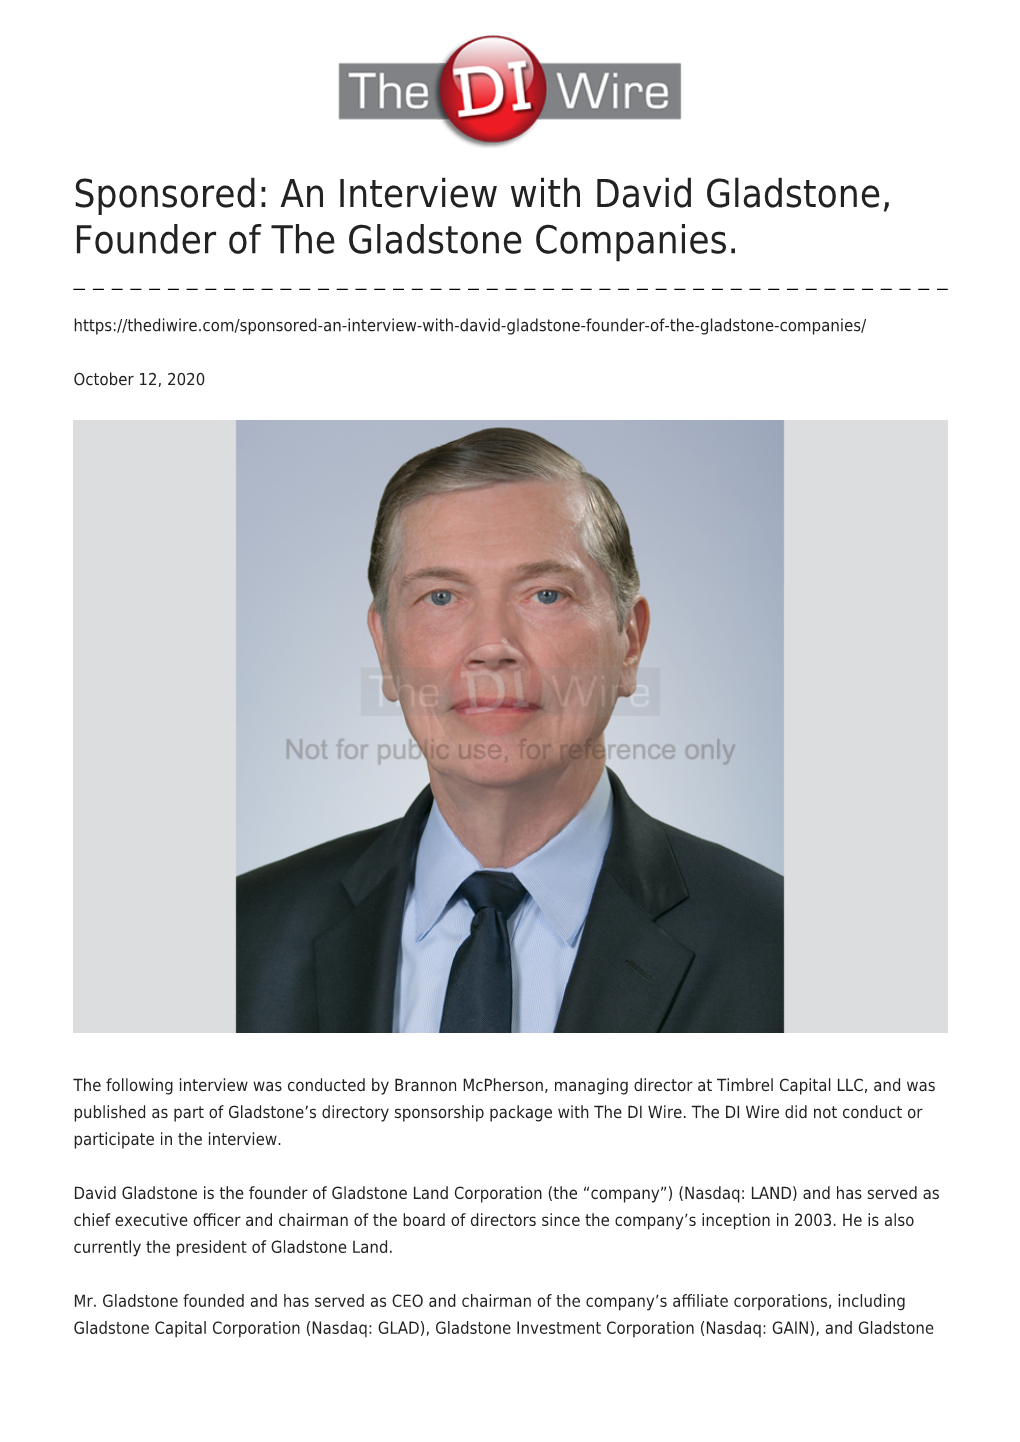 Sponsored: an Interview with David Gladstone, Founder of the Gladstone Companies